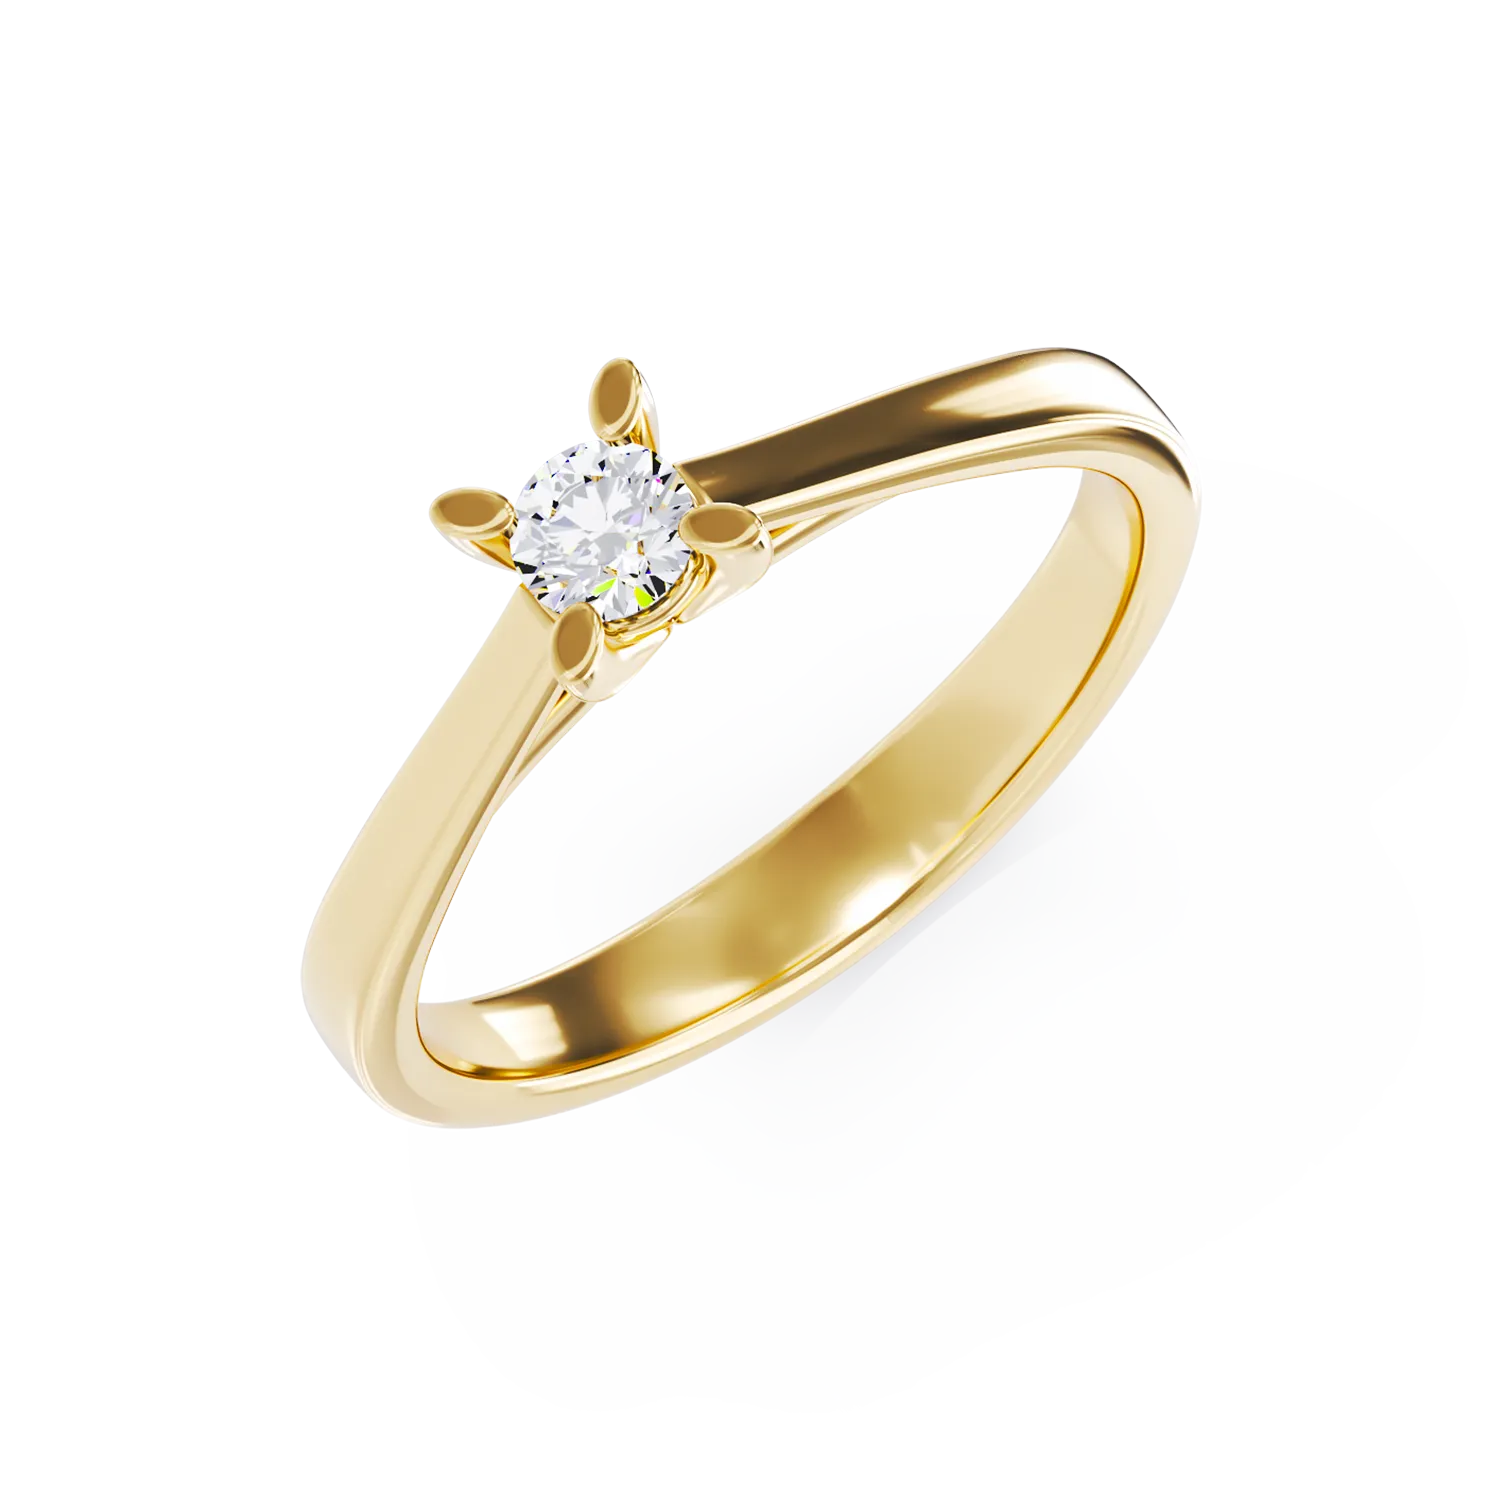 14K yellow gold engagement ring with a 0.10ct solitaire diamond